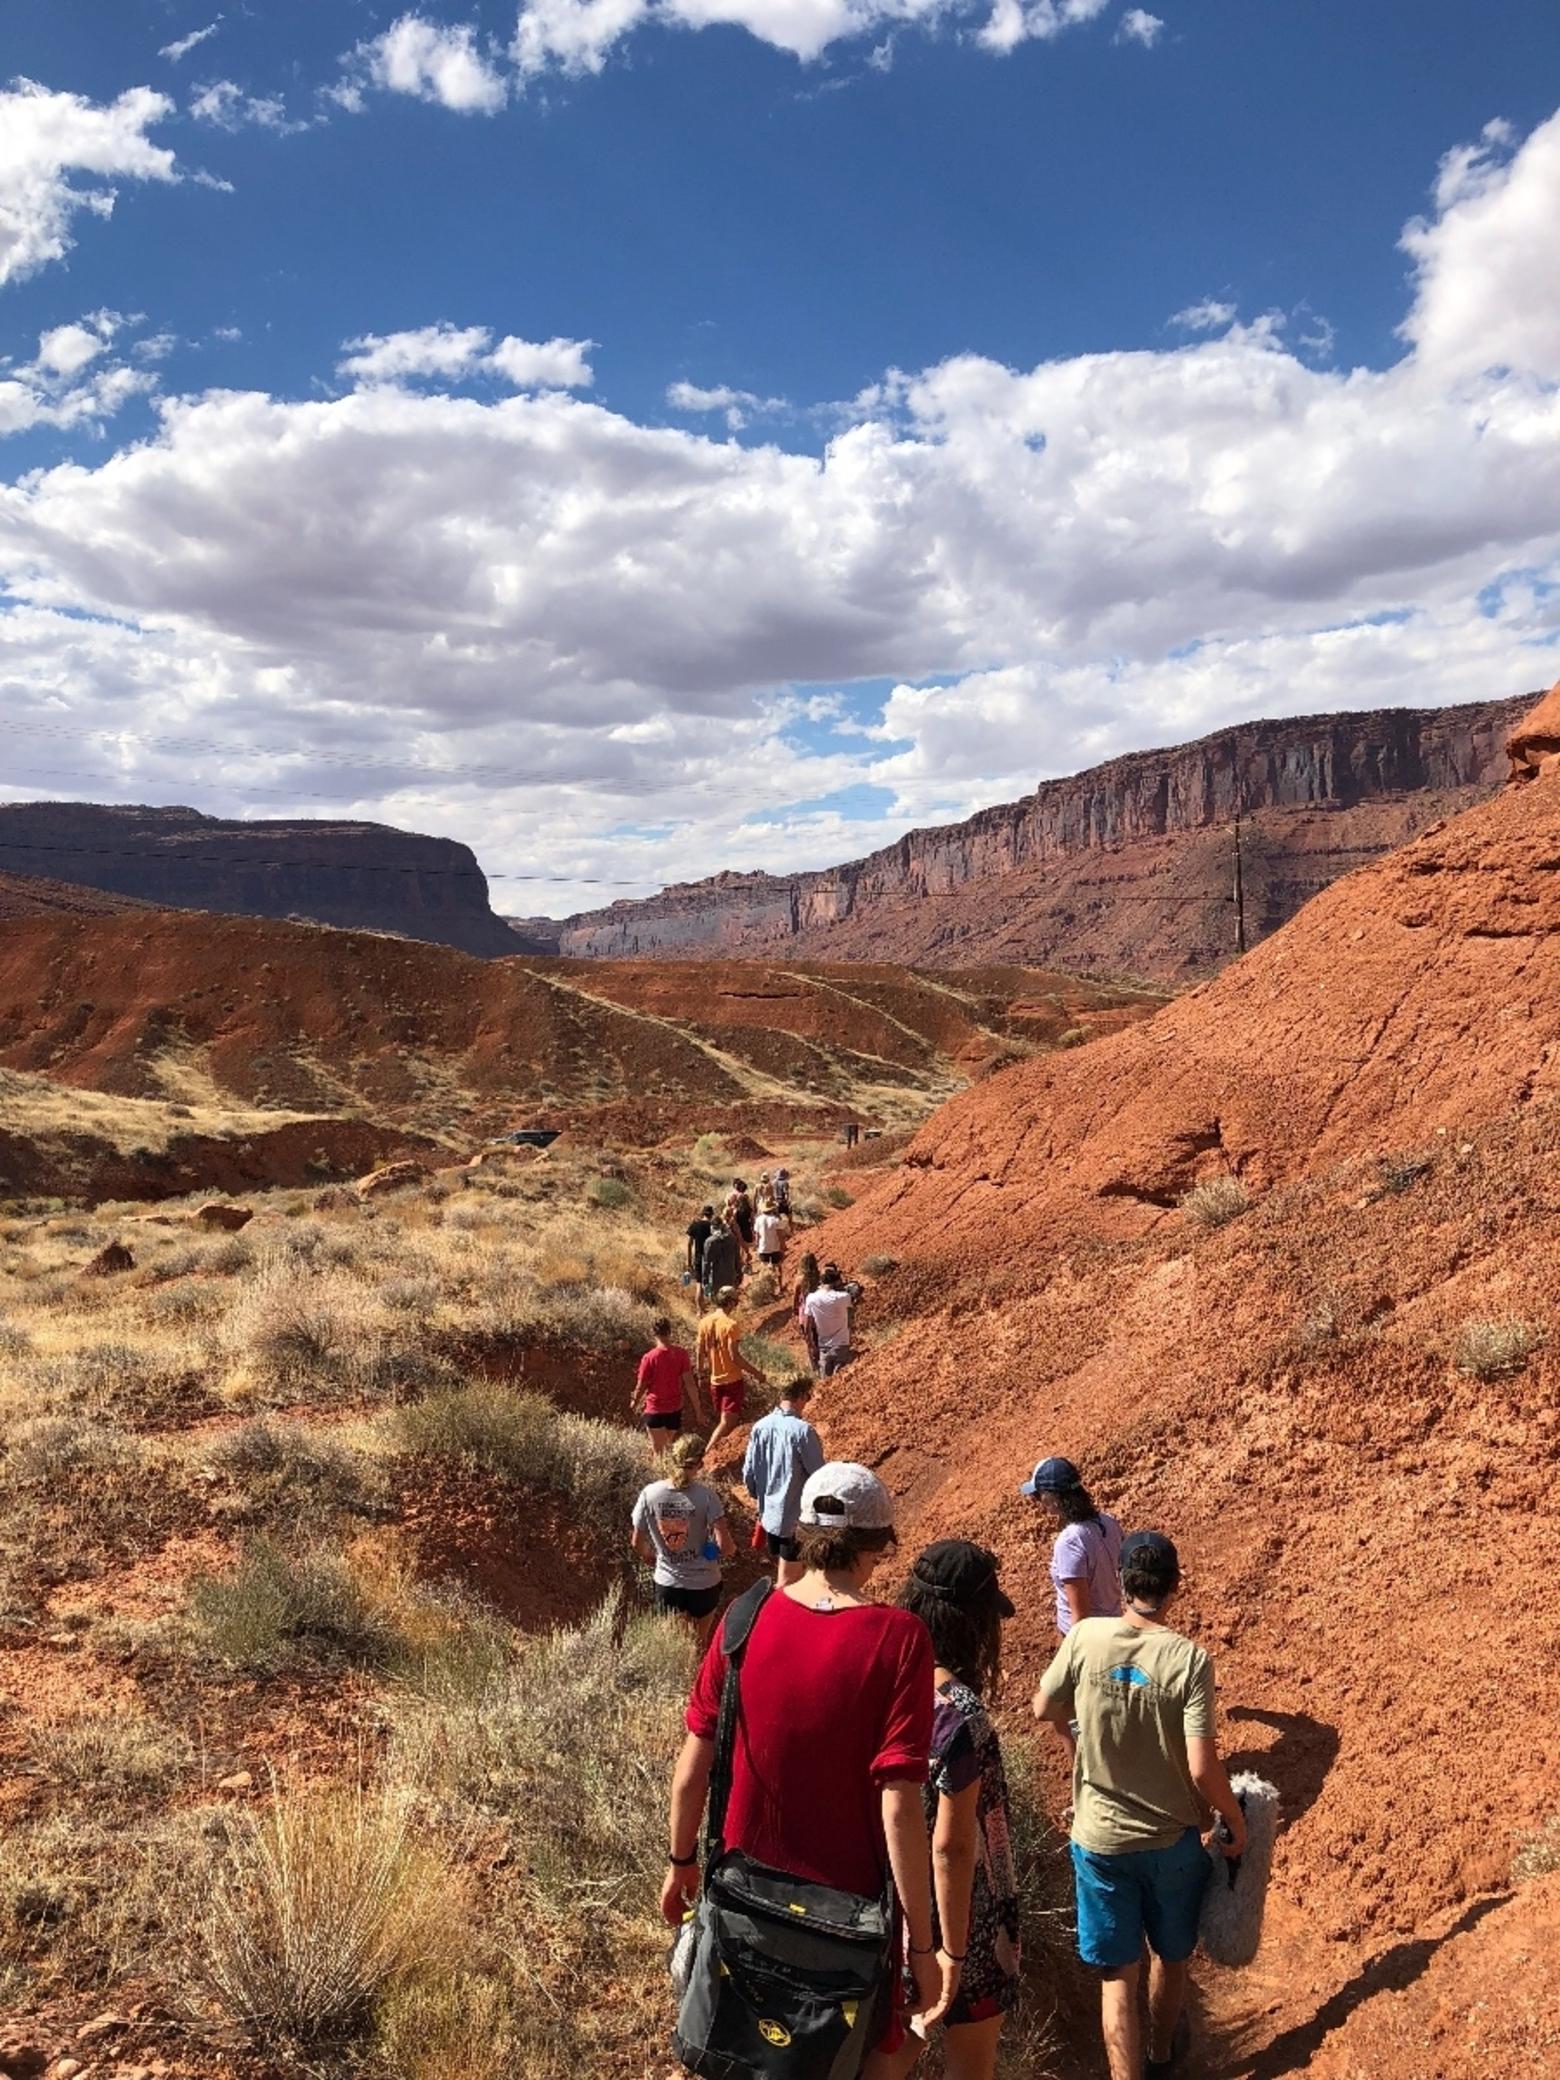 Whitman College's Semester in the West is one of the most heralded immersive learning programs in the country and uses the West as its outdoor classroom. Photo of Utah's Castle Valley by  